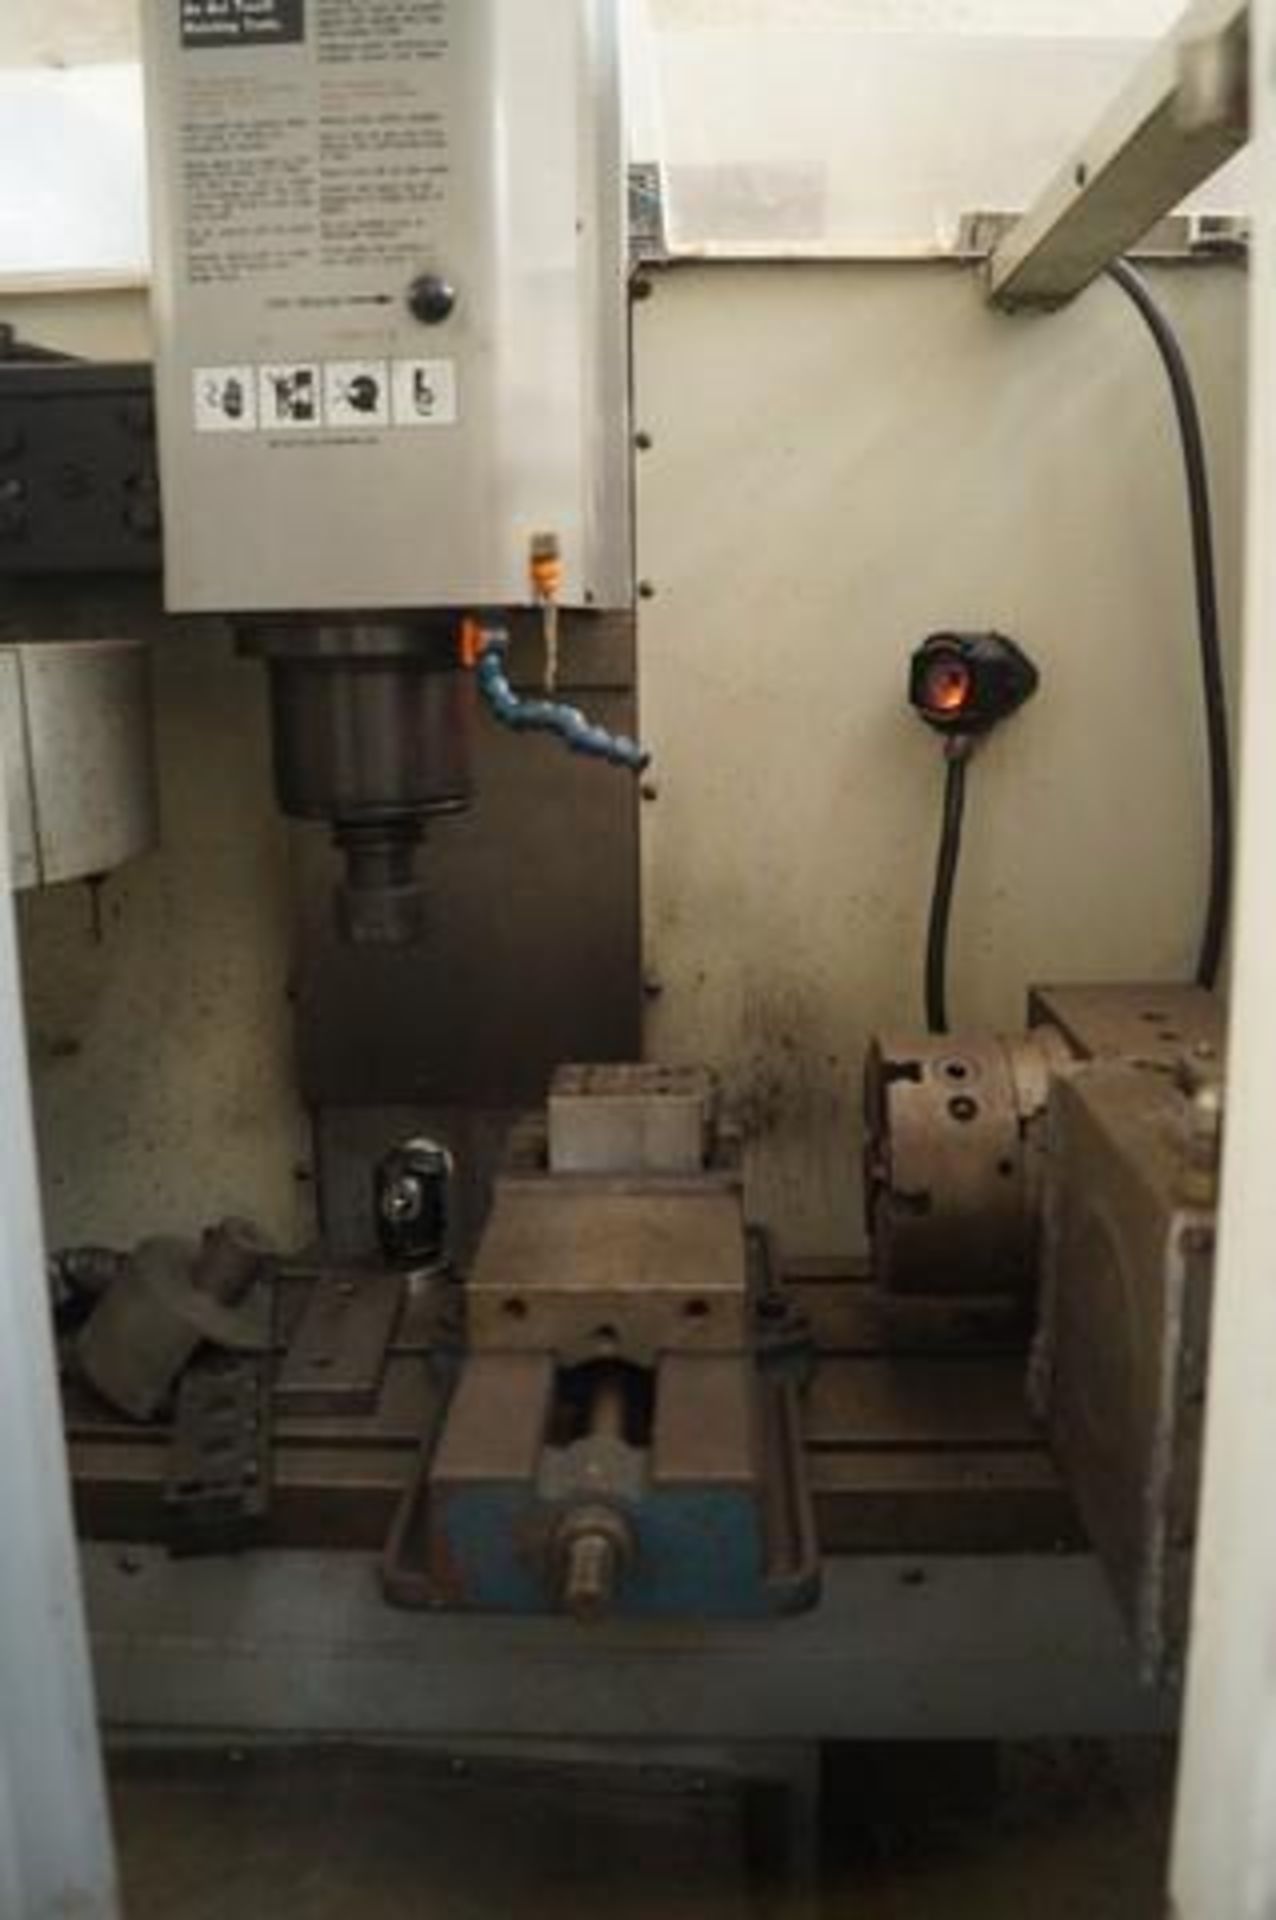 2010 HAAS SUPER MINI-MILL 3-Axis Vertical Machining Center - Image 4 of 8